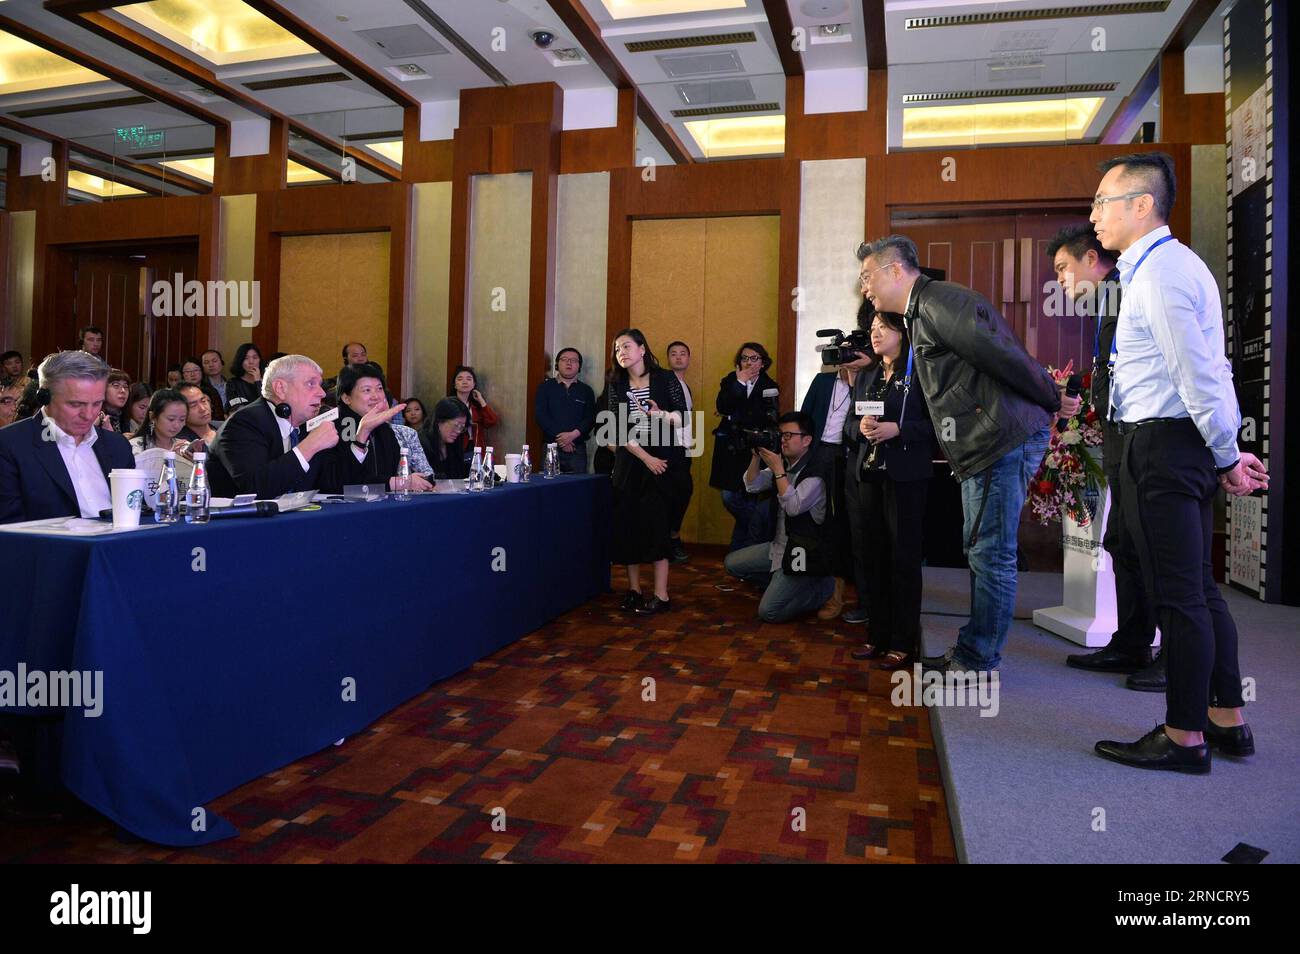 (160420) -- BEIJING, April 20, 2016 -- Director and screenwriter Zhang Qingfeng (3rd R) communicates with judges at the Motion Picture Association (MPA) Workshop in Beijing, capital of China, April 20, 2016. The closing ceremony of MPA workshop is held during the Beijing International Film Festival here on Wednesday. Winners of the workshop would get the chance to communicate with more famous directors and producers.) (zkr) CHINA-BEIJING-FILM FESTIVAL-MPA WORKSHOP(CN) LixXin PUBLICATIONxNOTxINxCHN   160420 Beijing April 20 2016 Director and Screenwriter Zhang Qingfeng 3rd r communicate With Ju Stock Photo